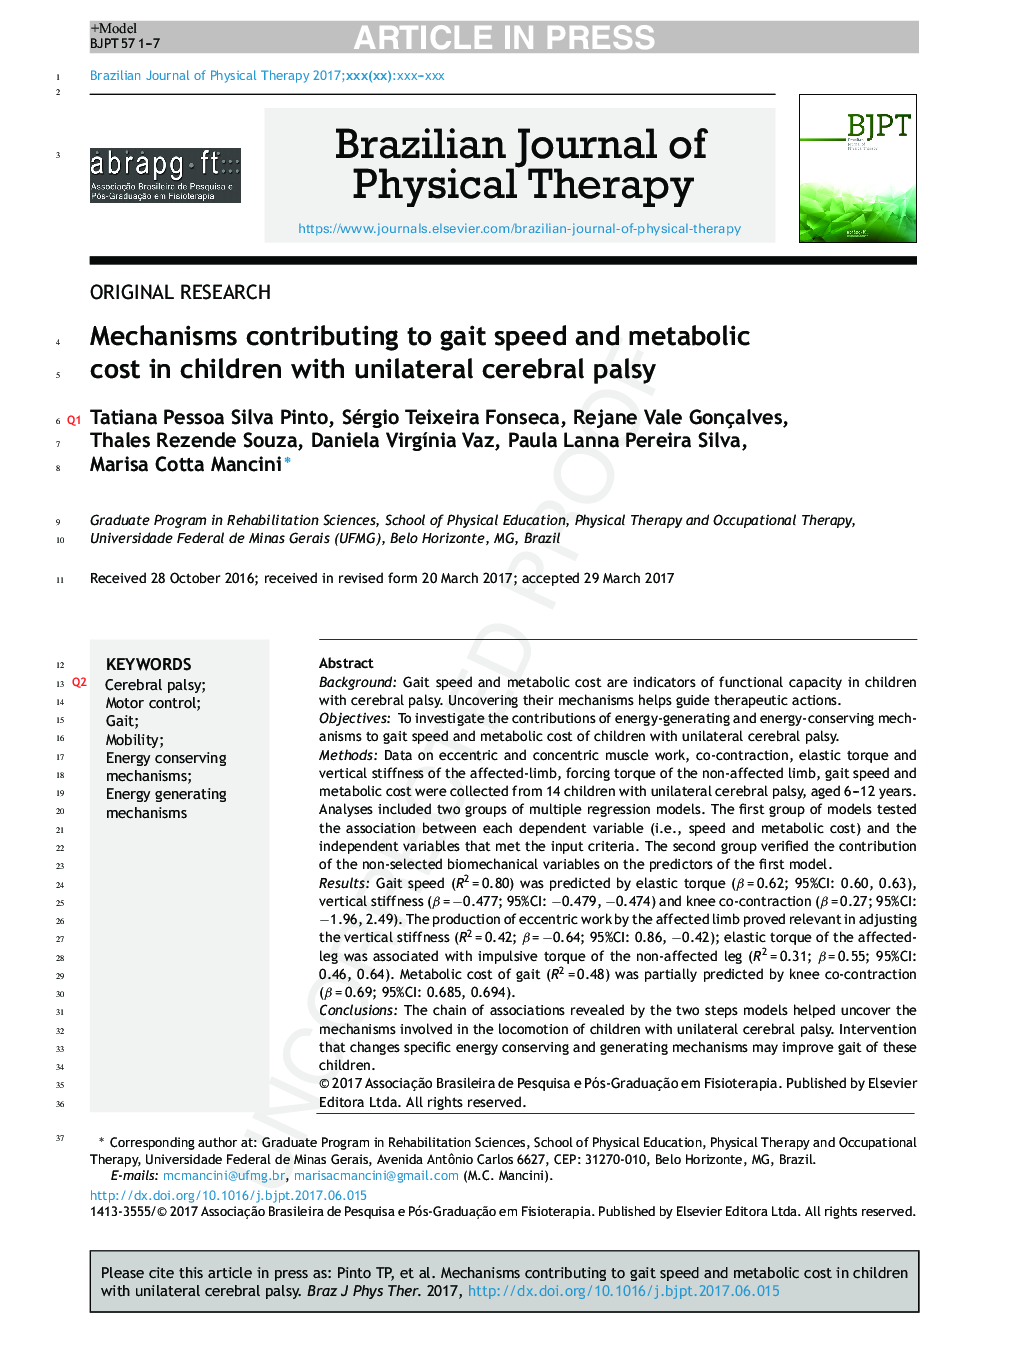 Mechanisms contributing to gait speed and metabolic cost in children with unilateral cerebral palsy